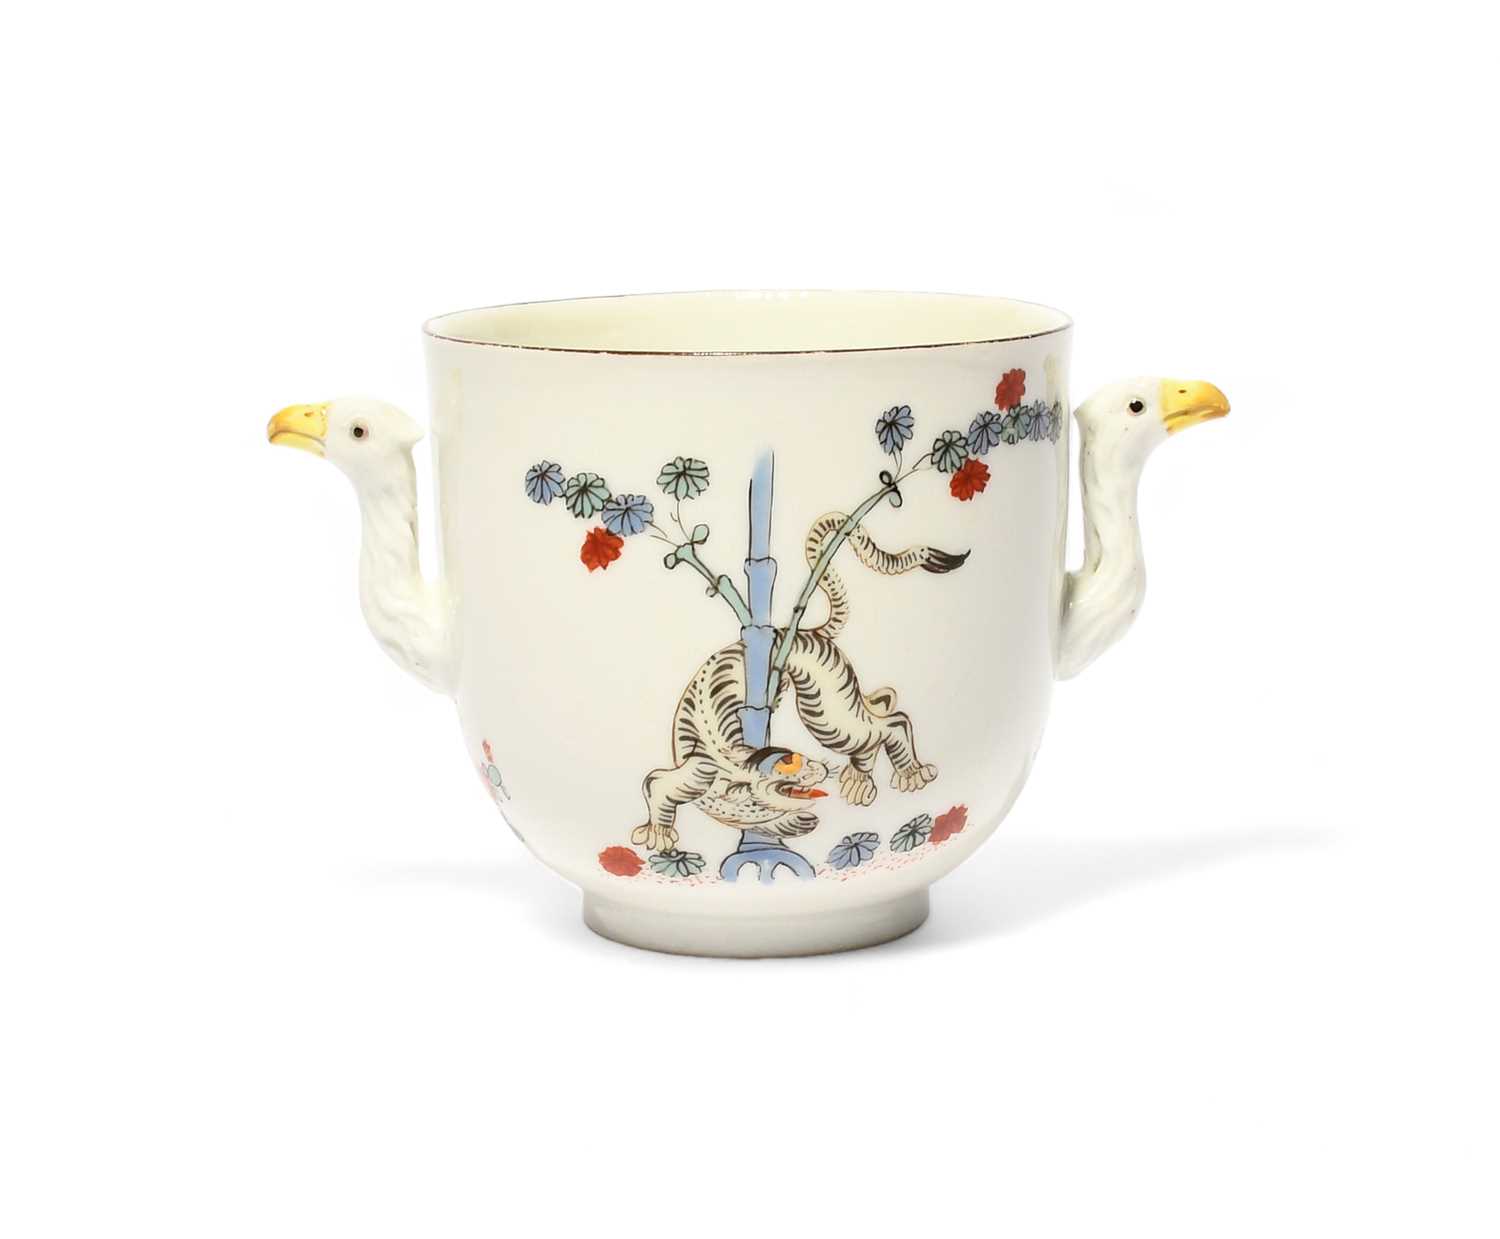 A Meissen two-handled cup, c.1730, painted in Kakiemon enamels with the Gelbe Löwe pattern, a